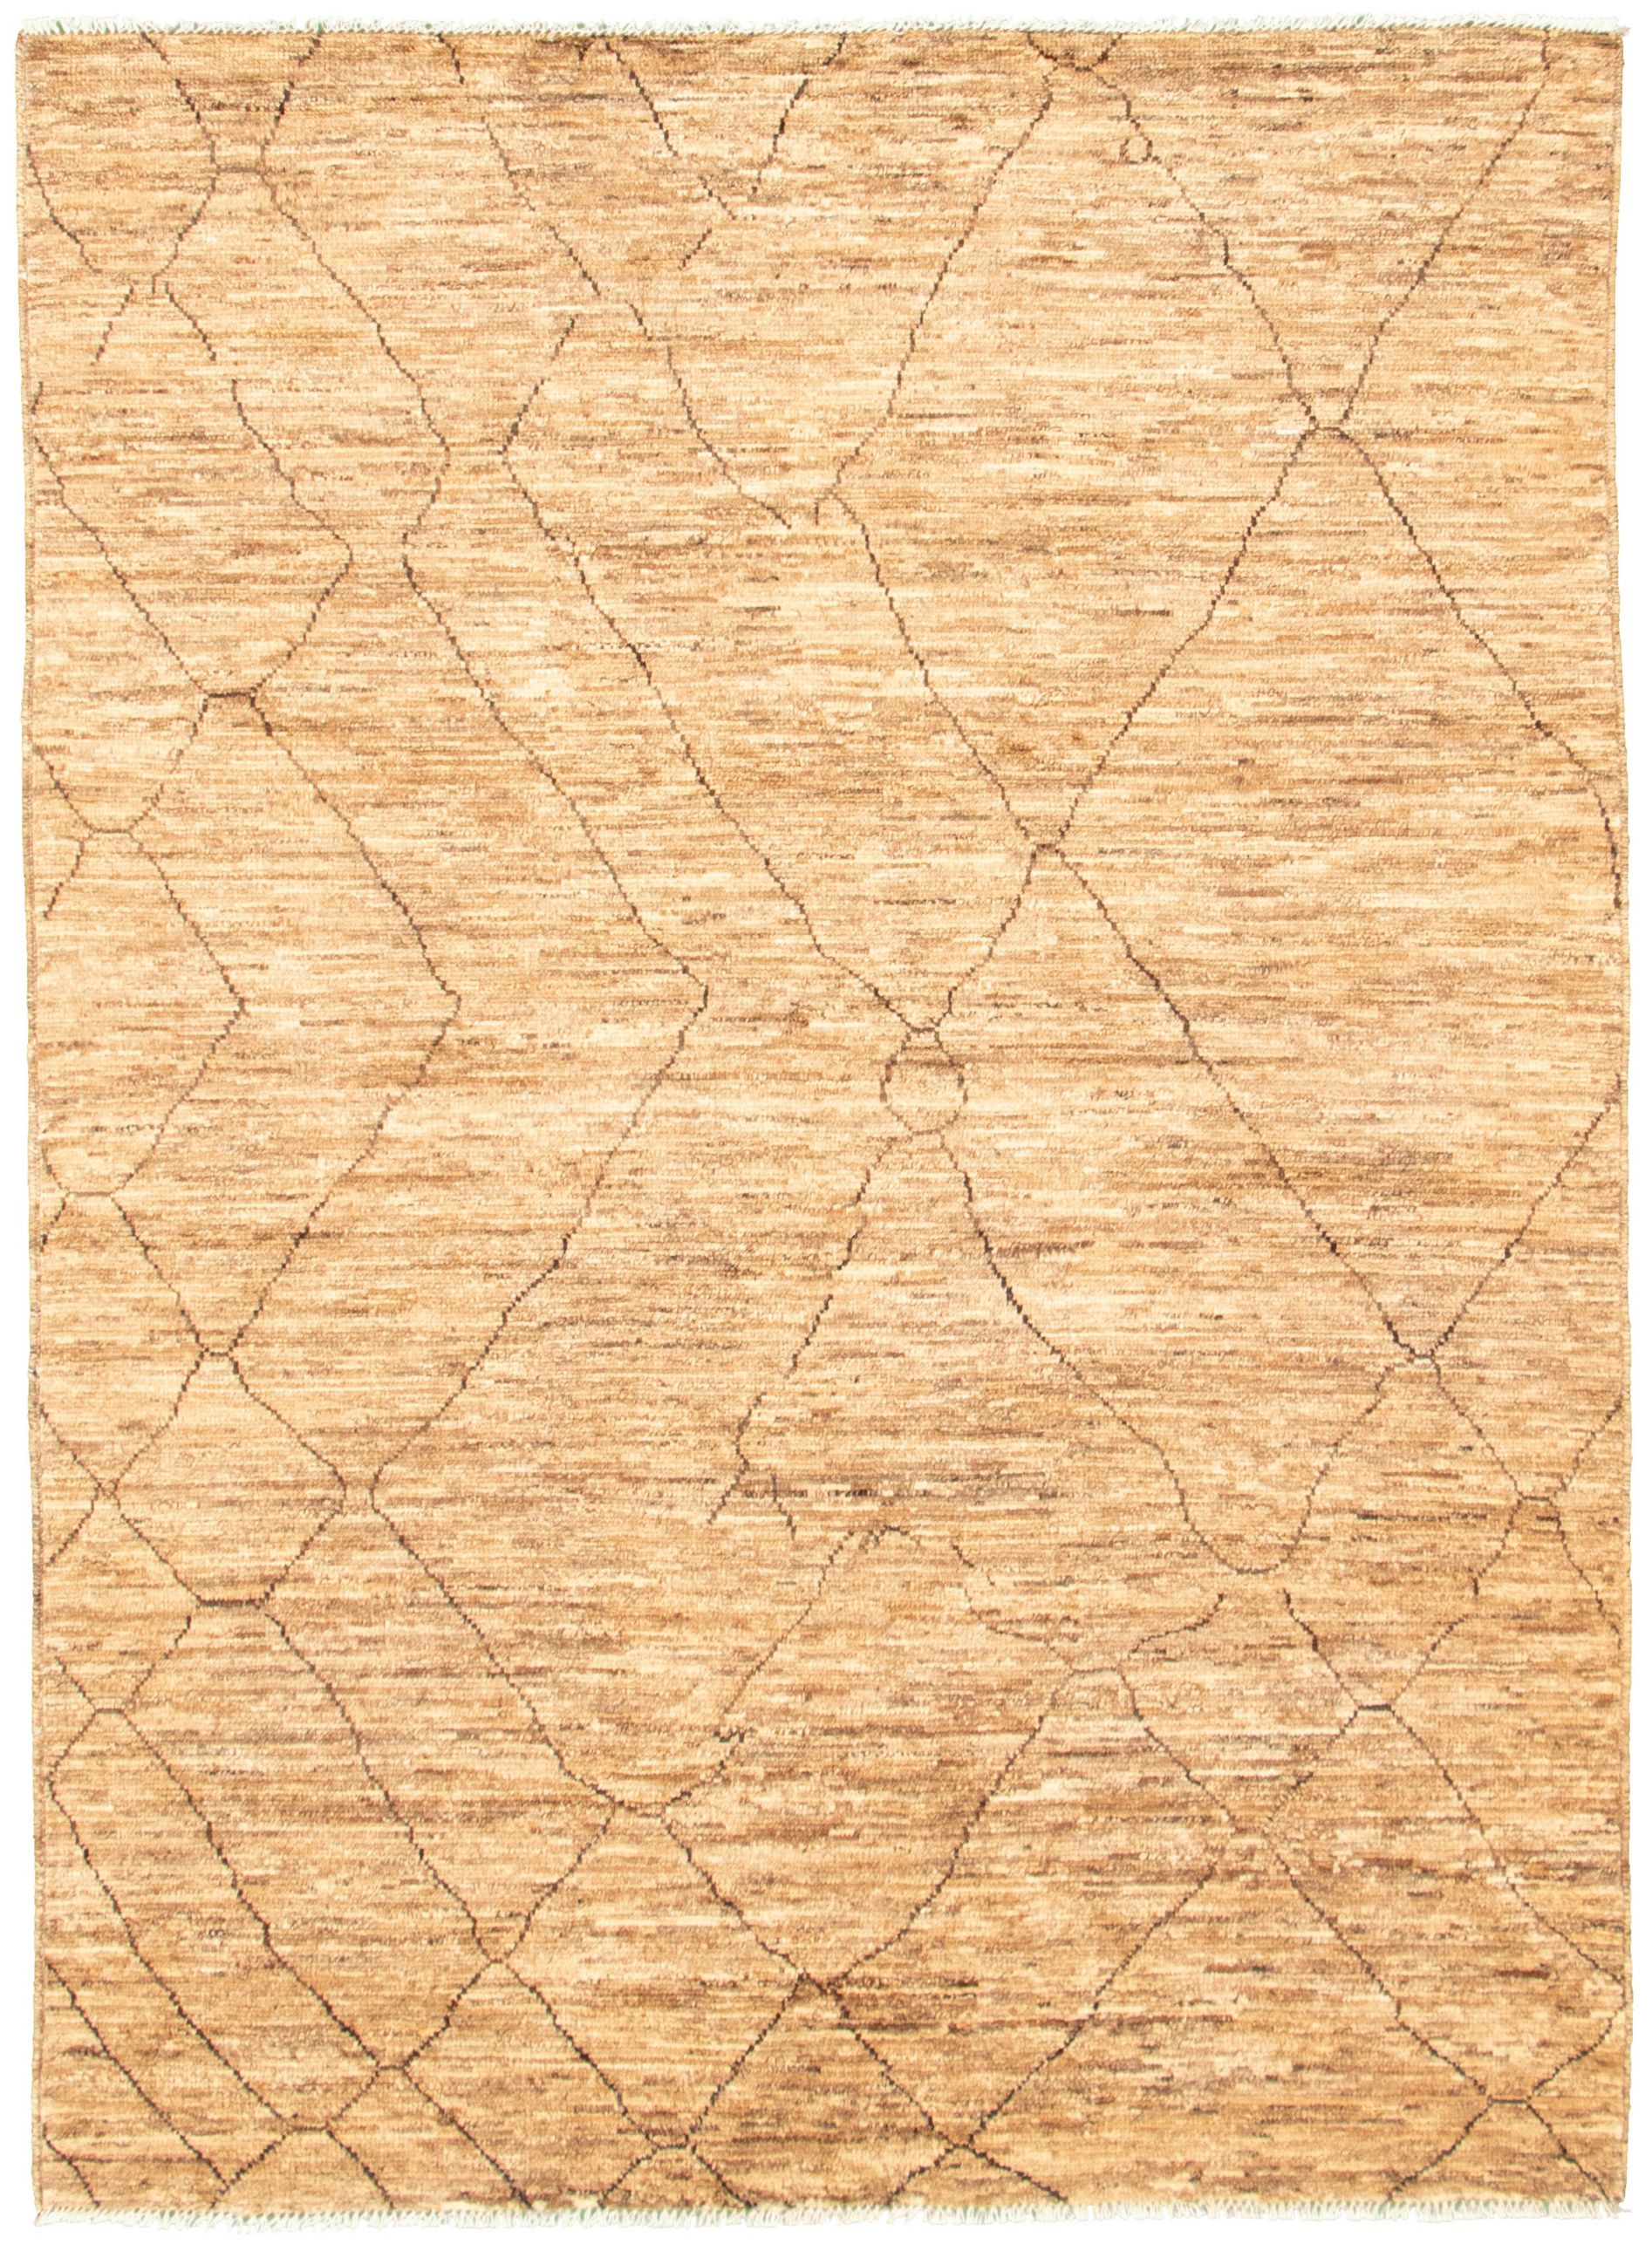 Hand-knotted Marrakech Tan Wool Rug 6'1" x 8'6" Size: 6'1" x 8'6"  